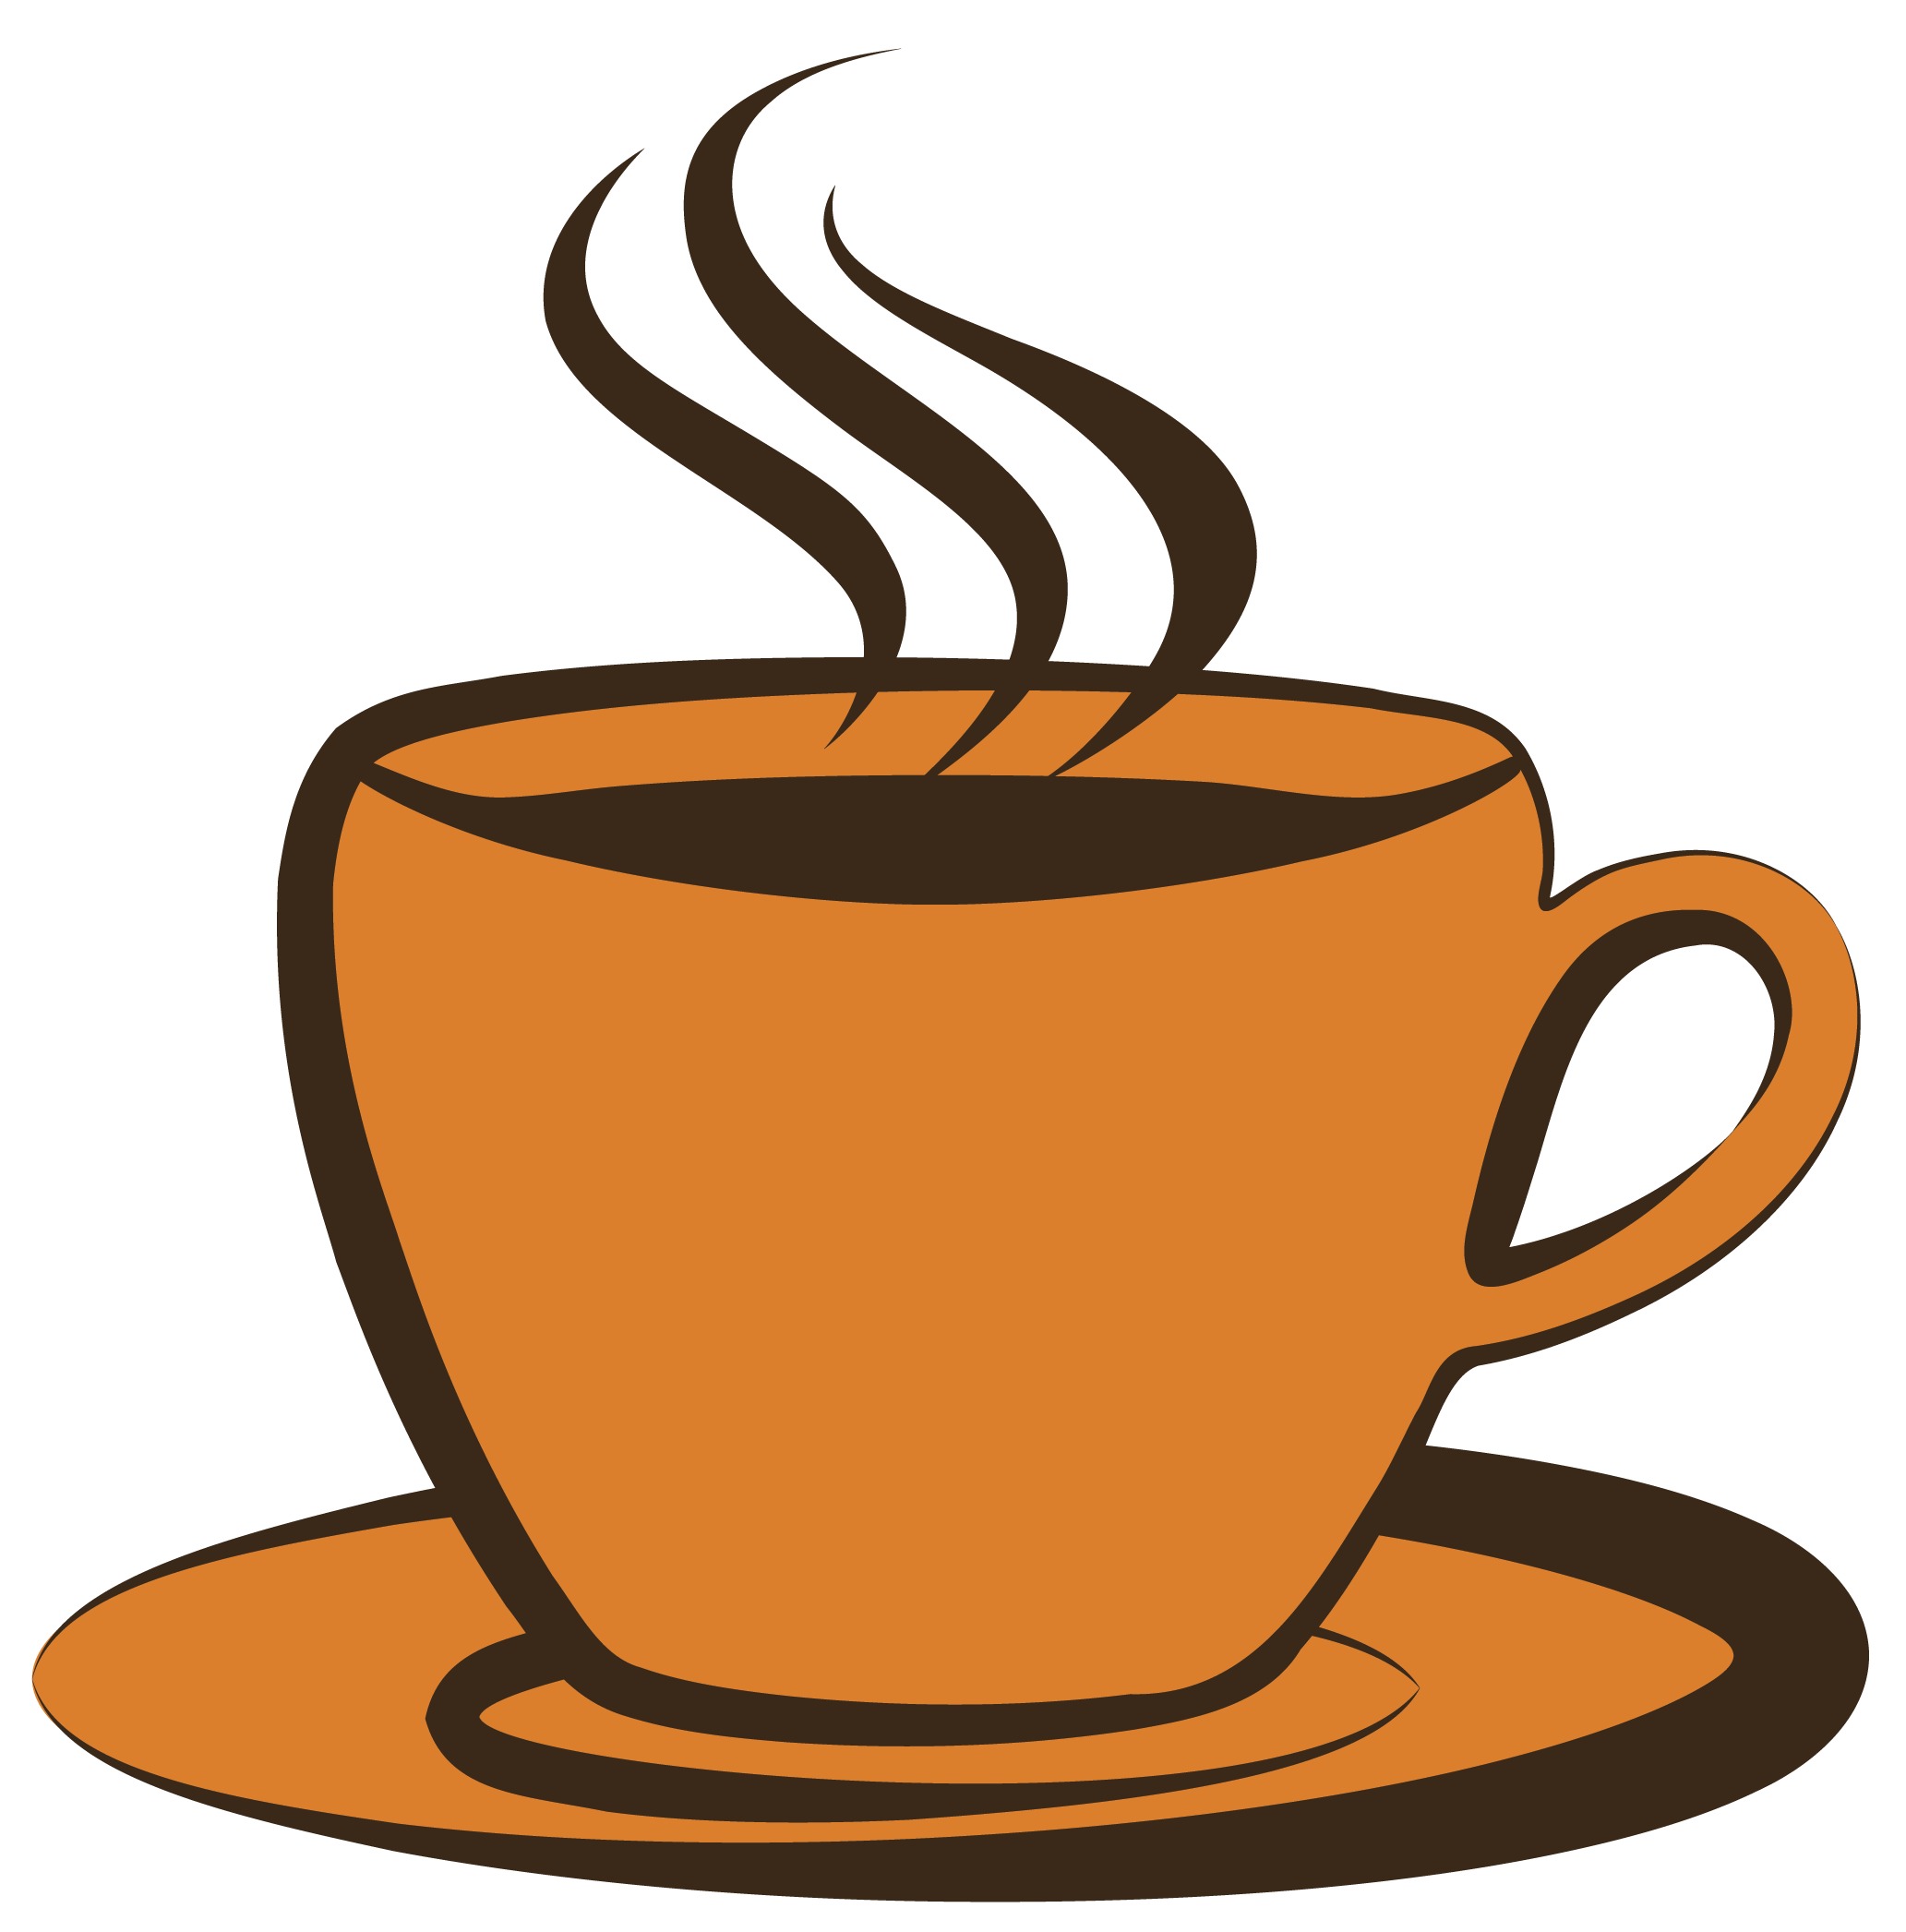 Cute cartoon coffee cup with steam coming out png download - 3032*2860 -  Free Transparent Cartoon Coffee Cup png Download. - CleanPNG / KissPNG